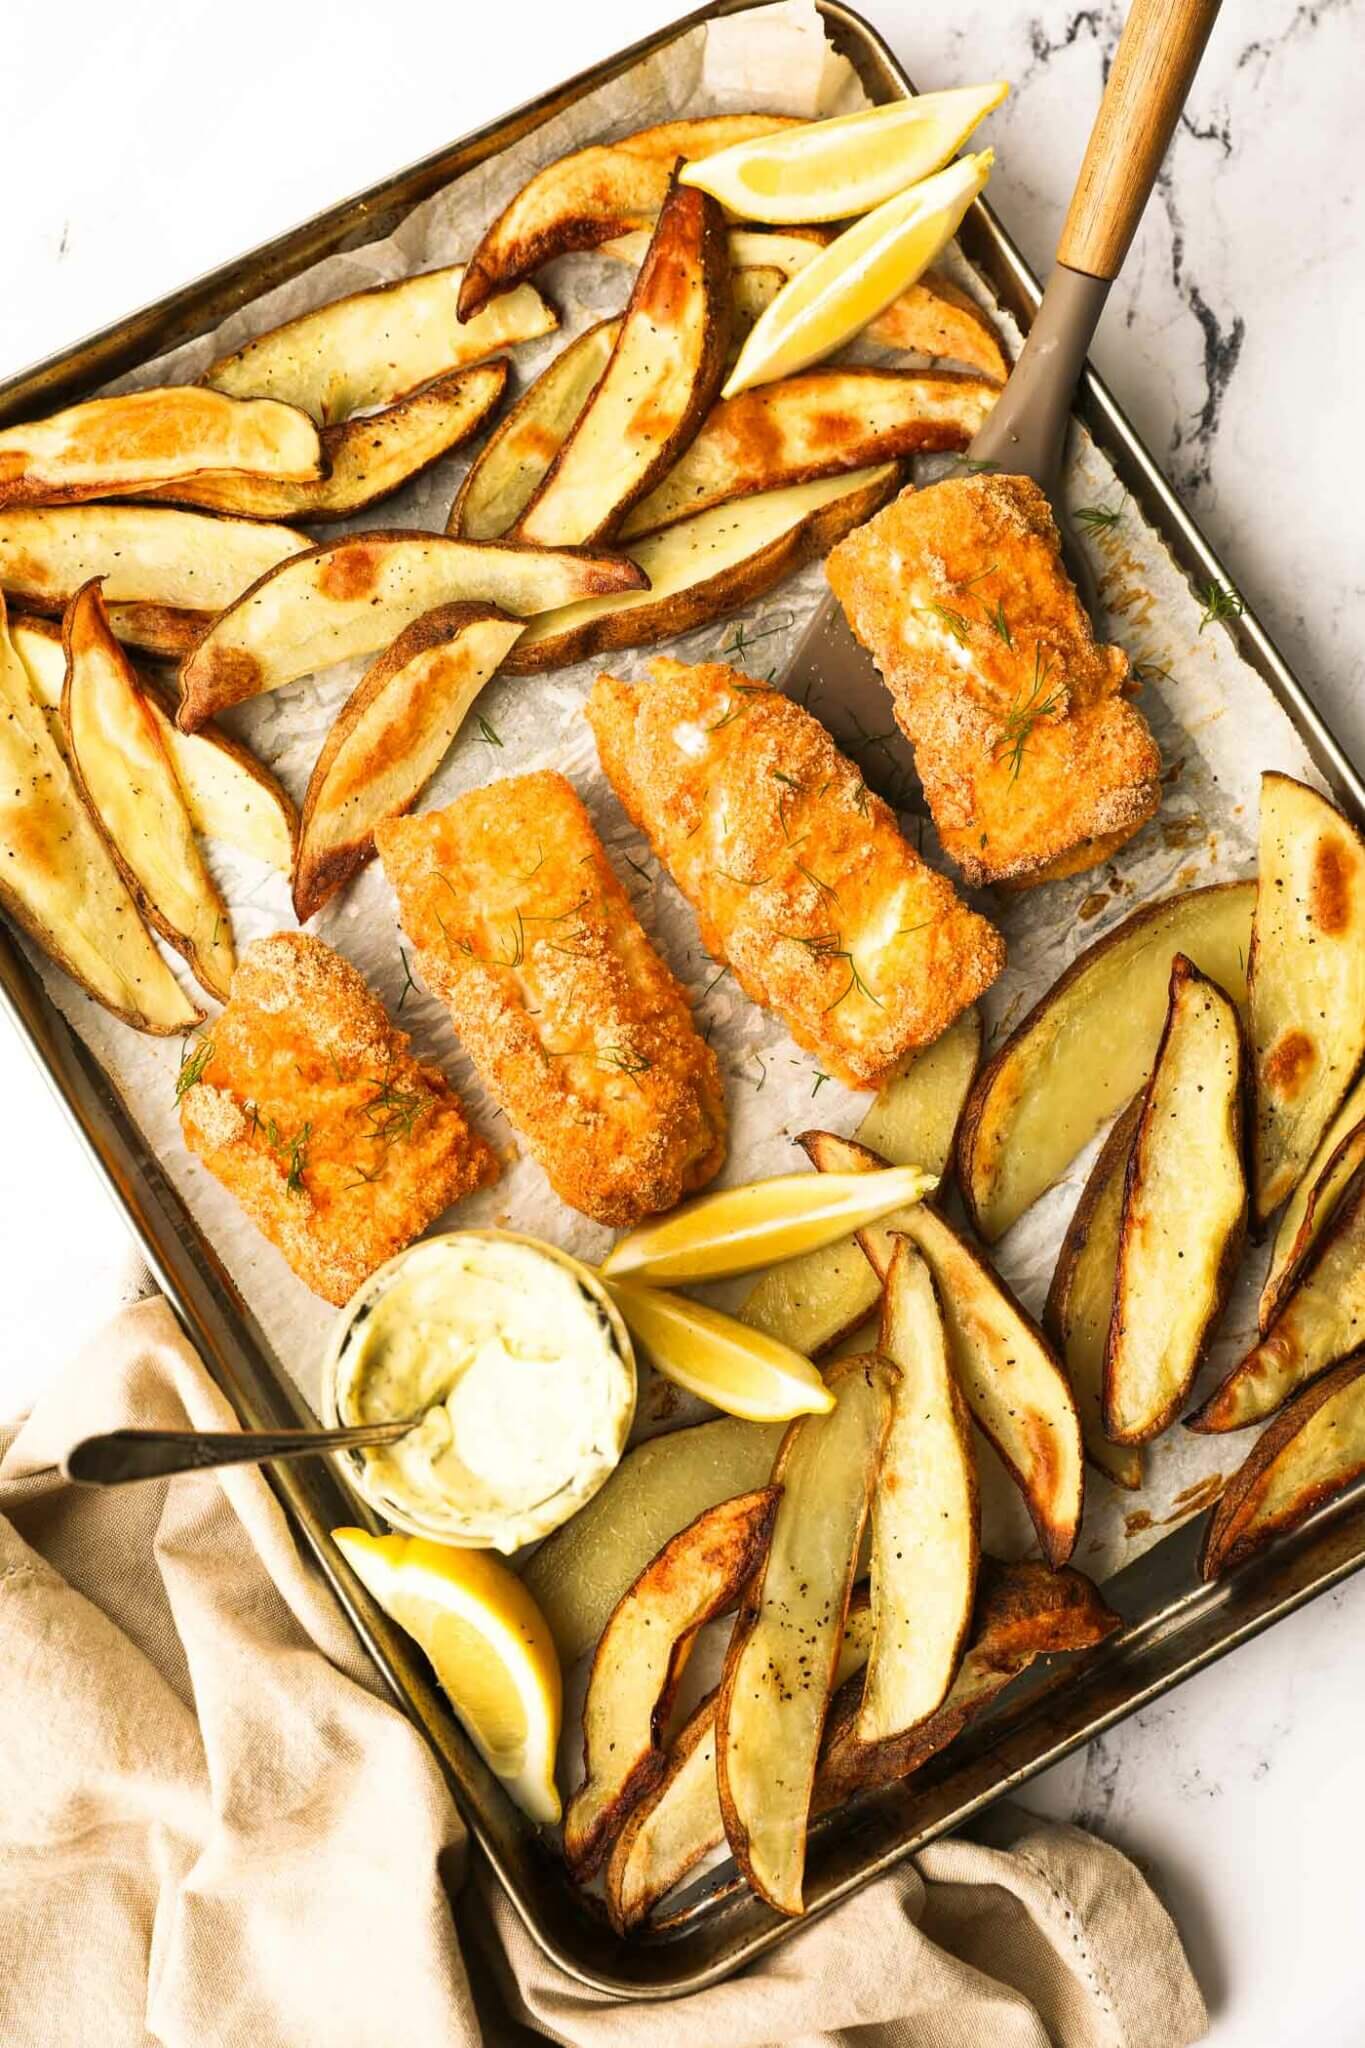 Baked (Crispy!) Gluten Free Fish and Chips - Real Simple Good